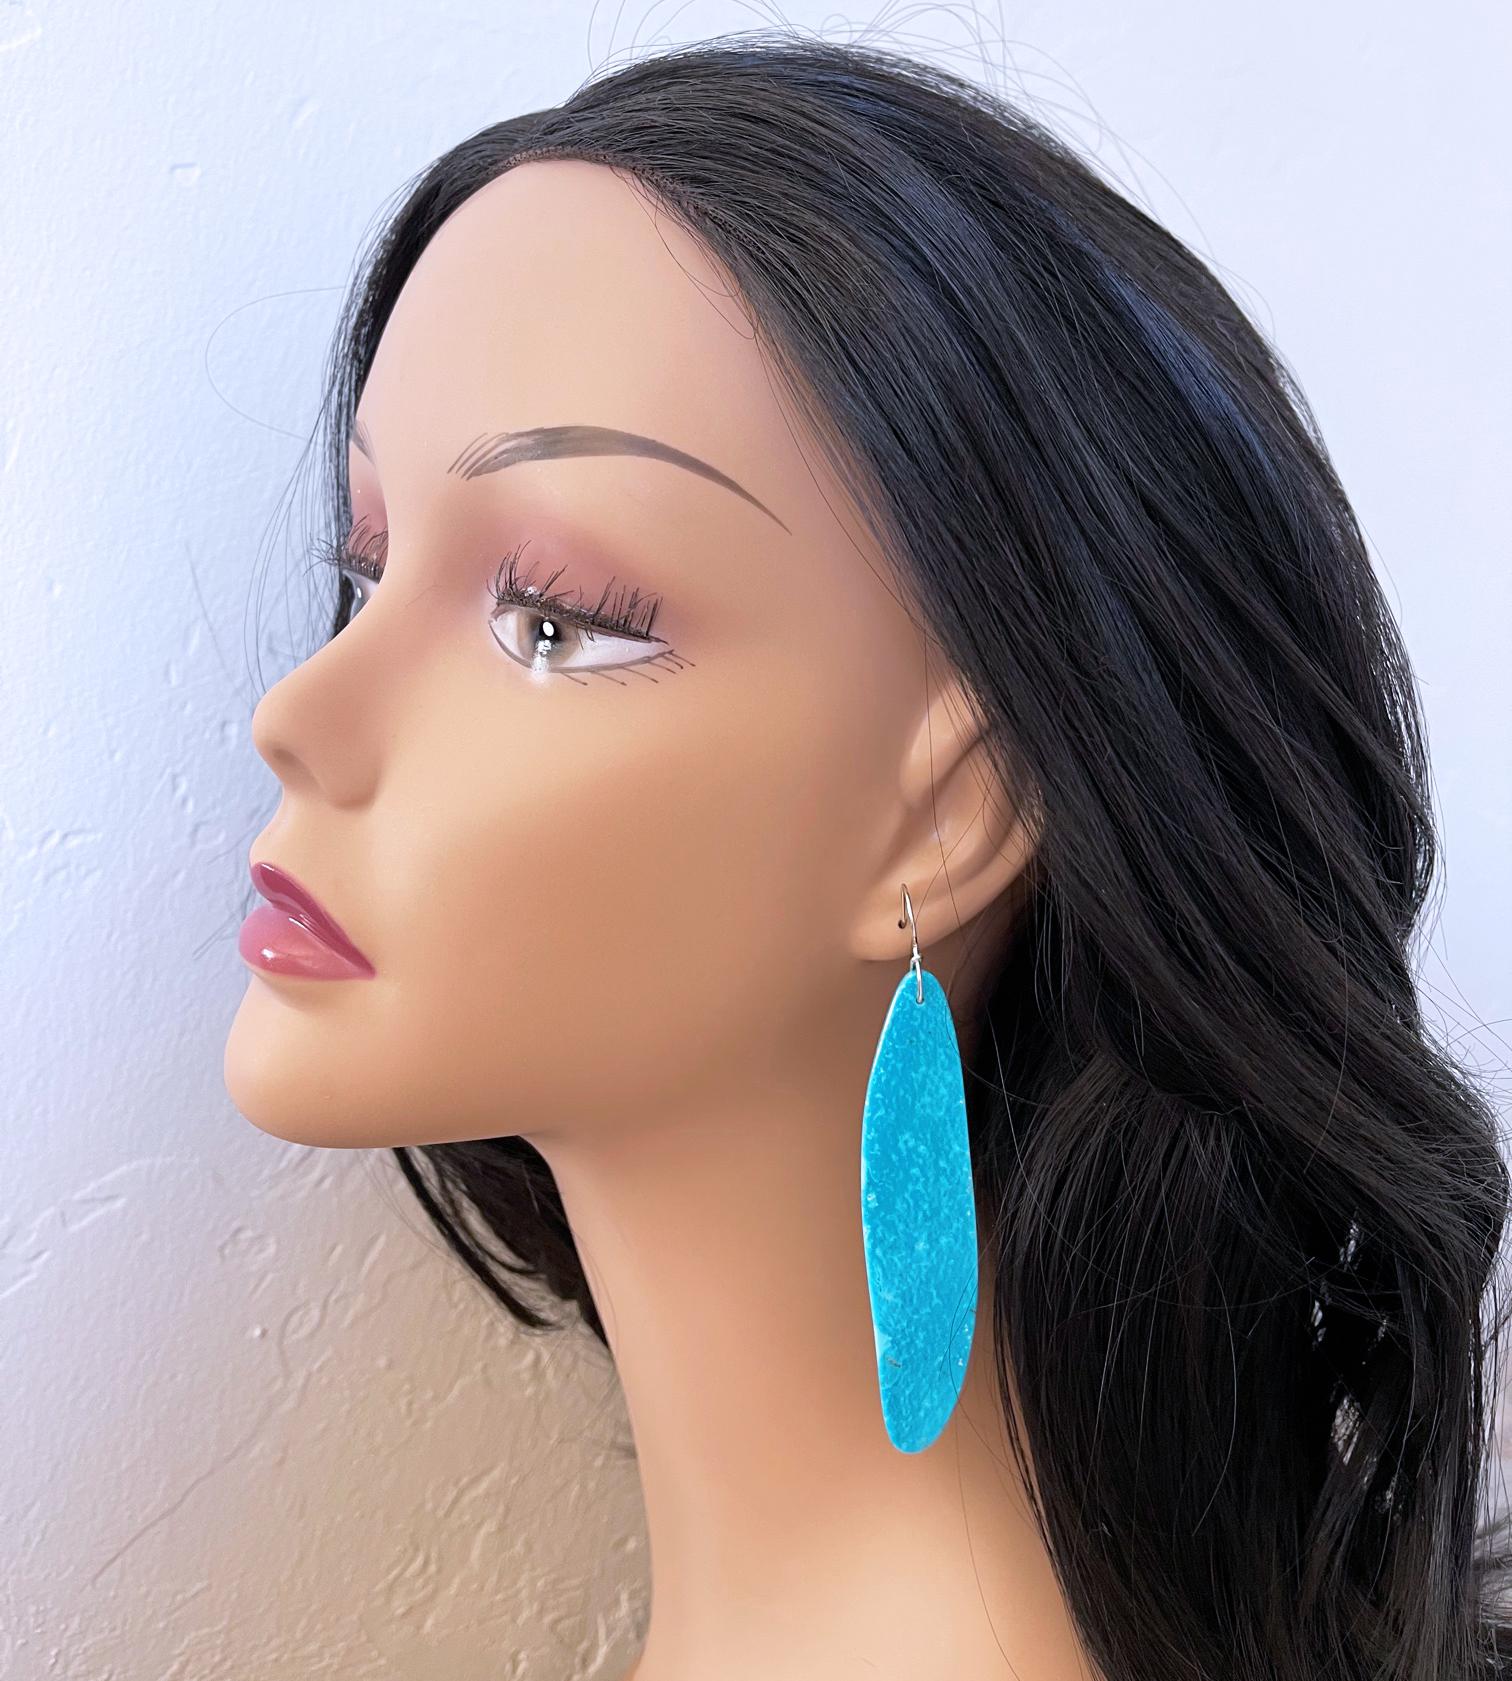 Breathtaking very long sky blue Nacozari turquoise slab cuts were set on sterling silver ear wires to make these stunning one of a kind earrings.  The earrings measure approximately 3.5 inches (8.9 cm) long from top to bottom. The intense blue color